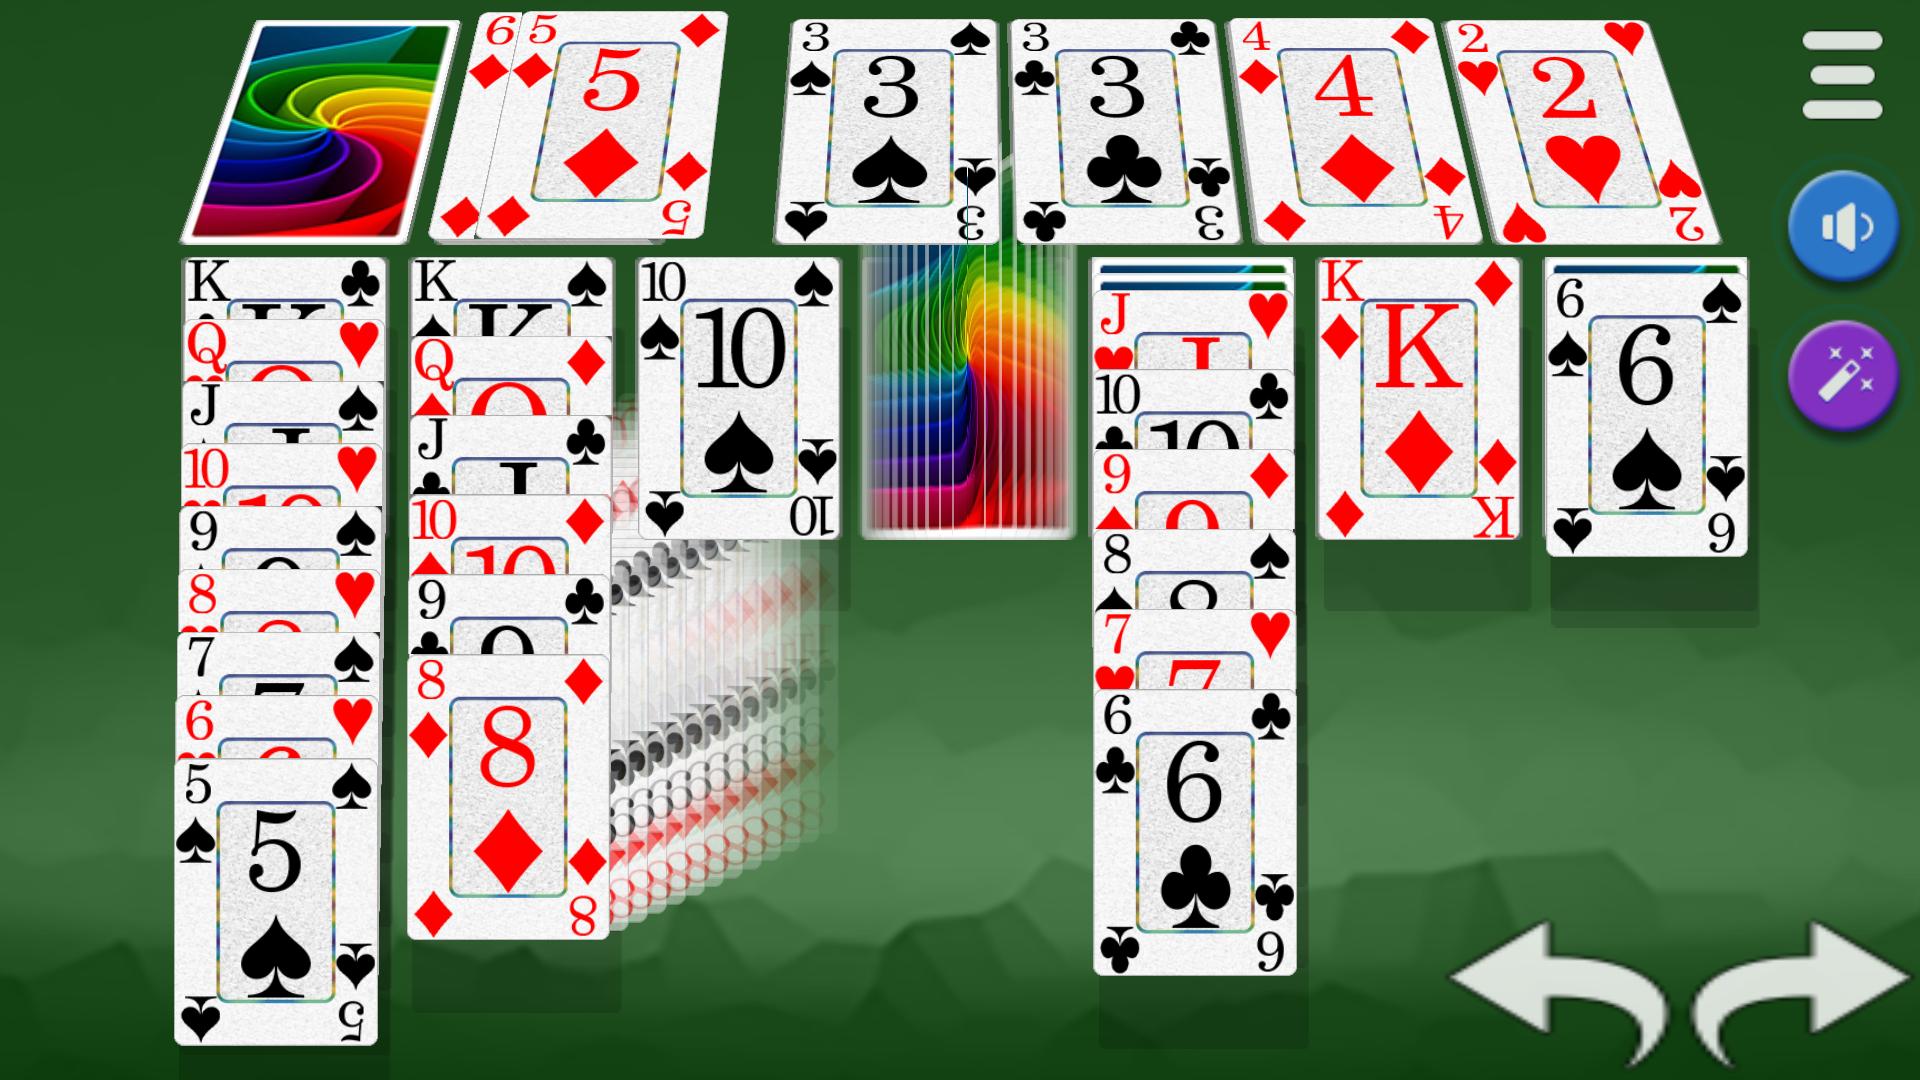 Solitario 3D for Android - APK Download